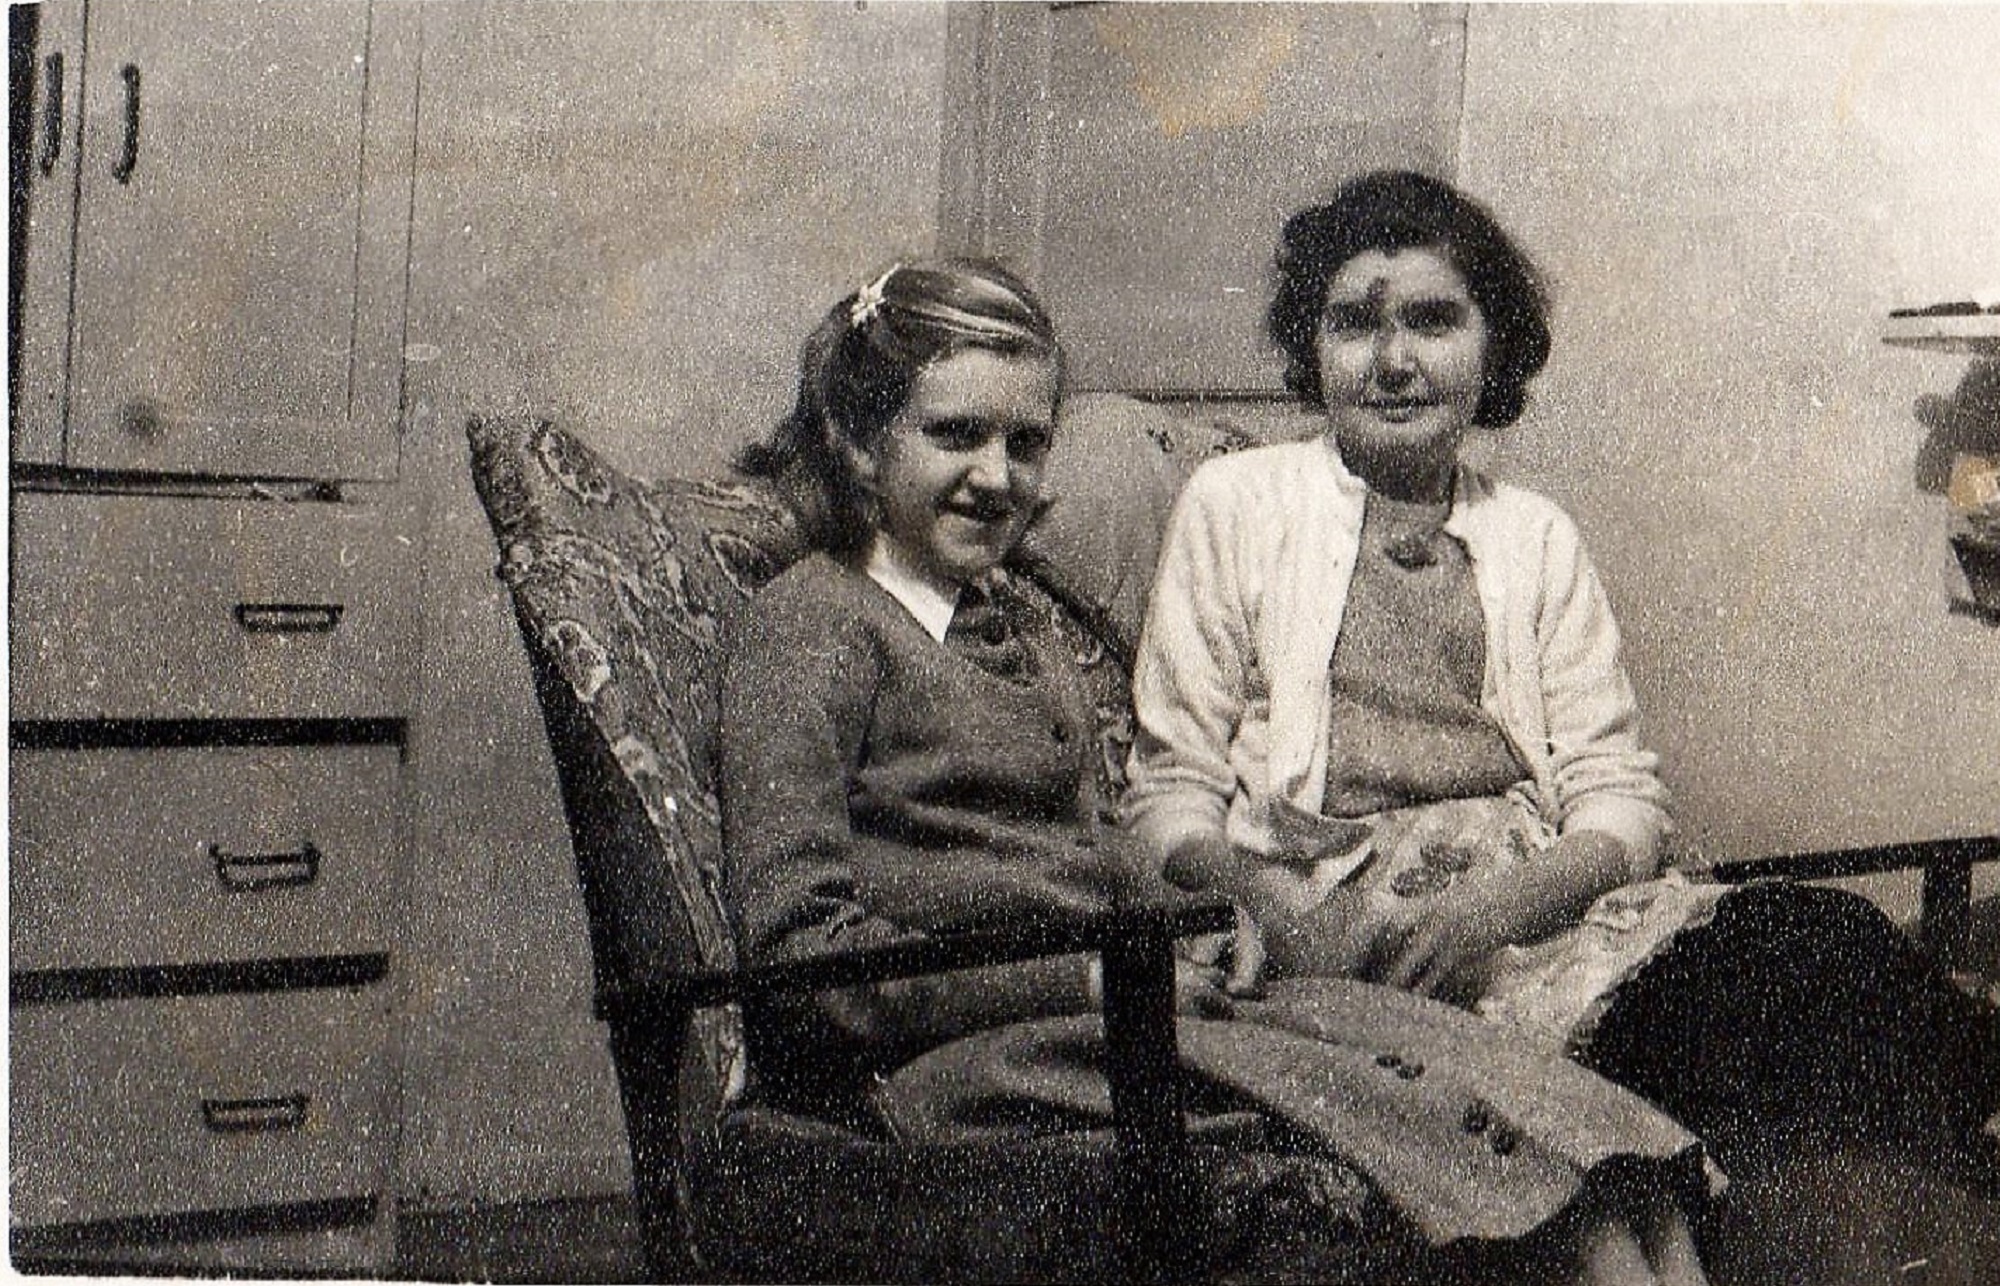 My mother Nellie Attwell & me, Brenda Attwell (now Ward) sitting on our little settee to the left of the fire place with the door into the hall behind us. Port Talbot Place, Fforestfach, Swansea